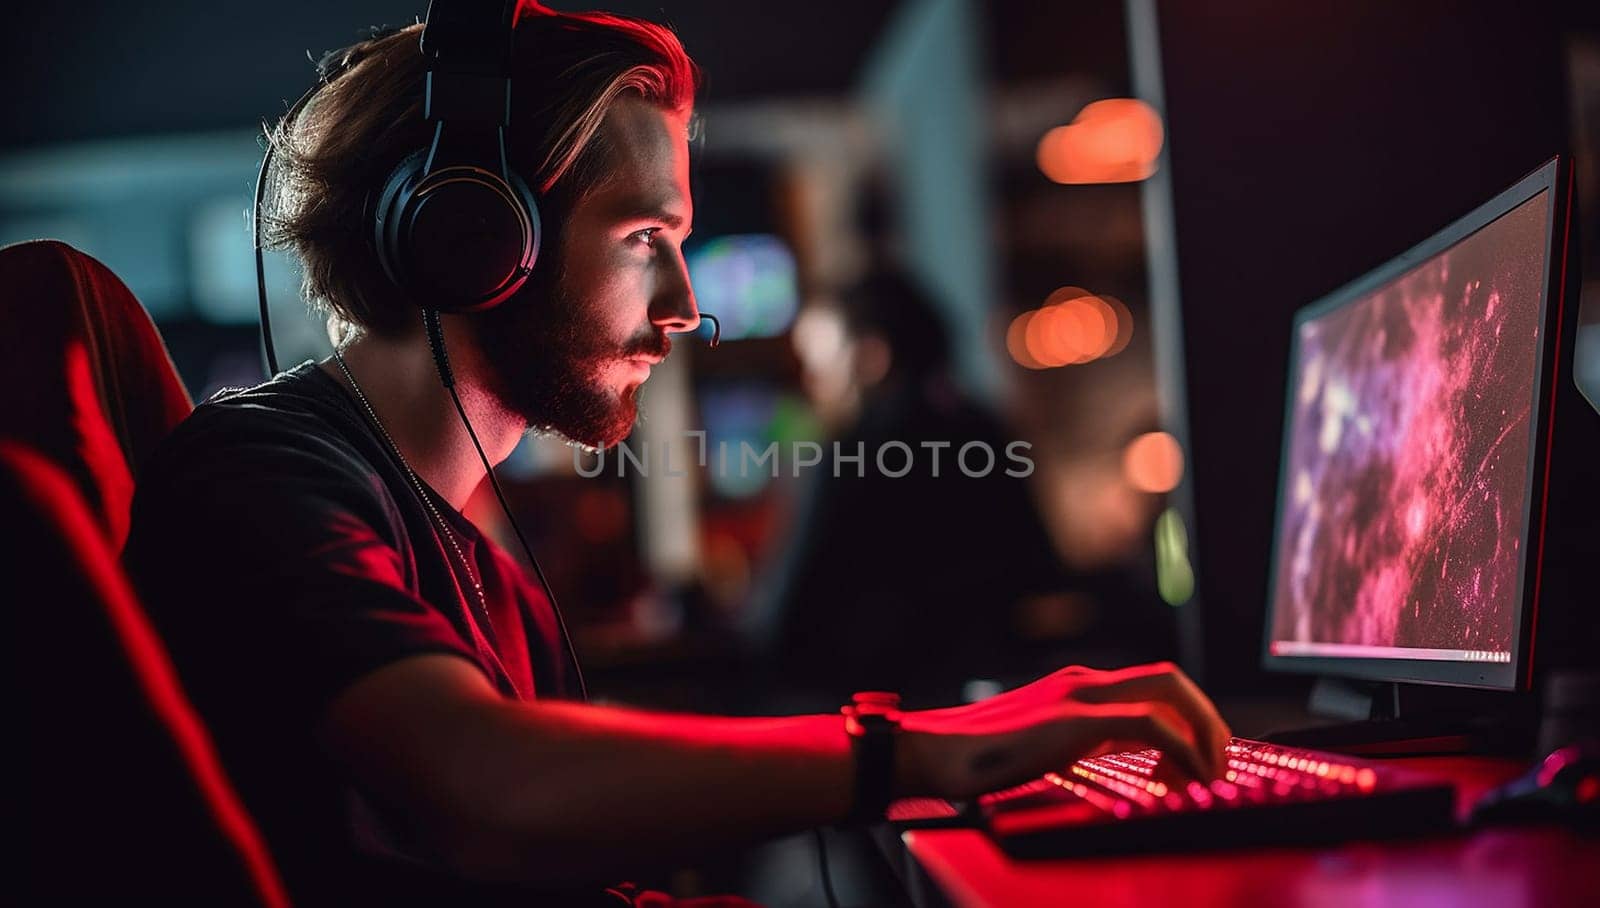 Professional Gamer Playing First-Person Shooter Online Video Game on His Powerful Personal Computer. Room and PC have Colorful Neon Led Lights. Young Man is Wearing a headset. Cozy Evening at Home. by Annebel146